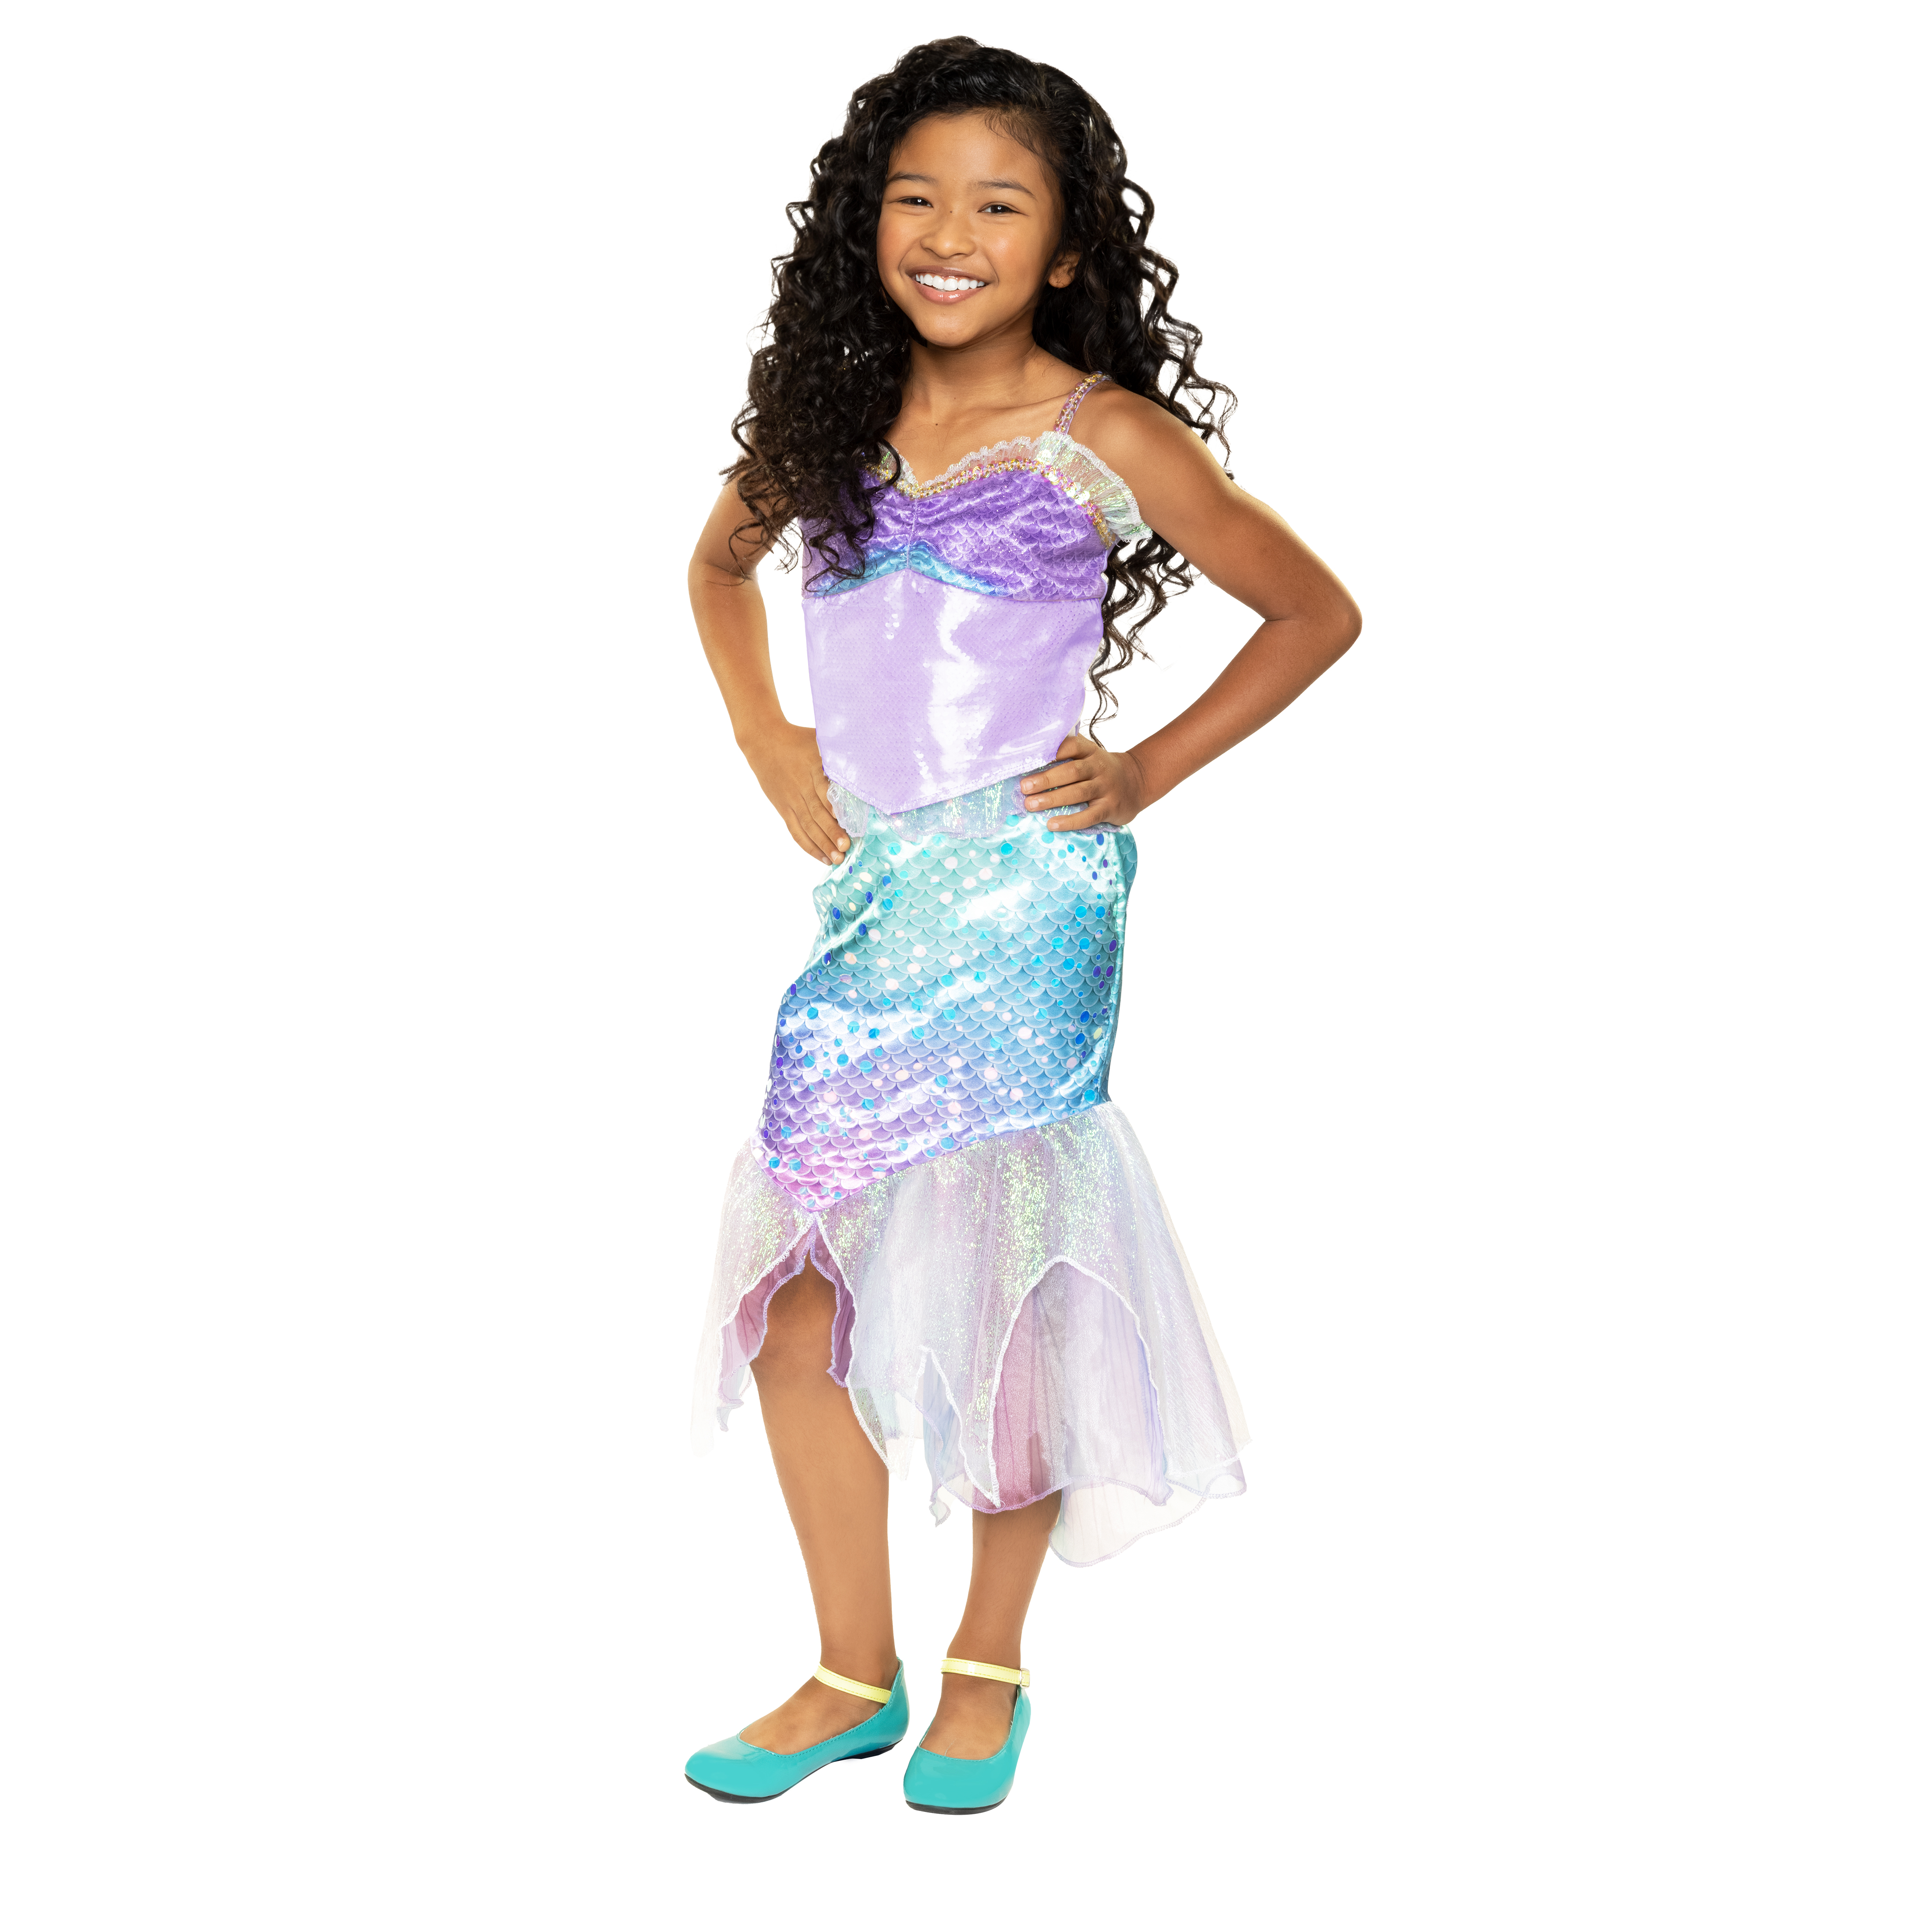 Disney Little Mermaid Ariel Two Piece Mermaid Deluxe Multicolored Fashion Dress Size 4 to 6 - image 3 of 8